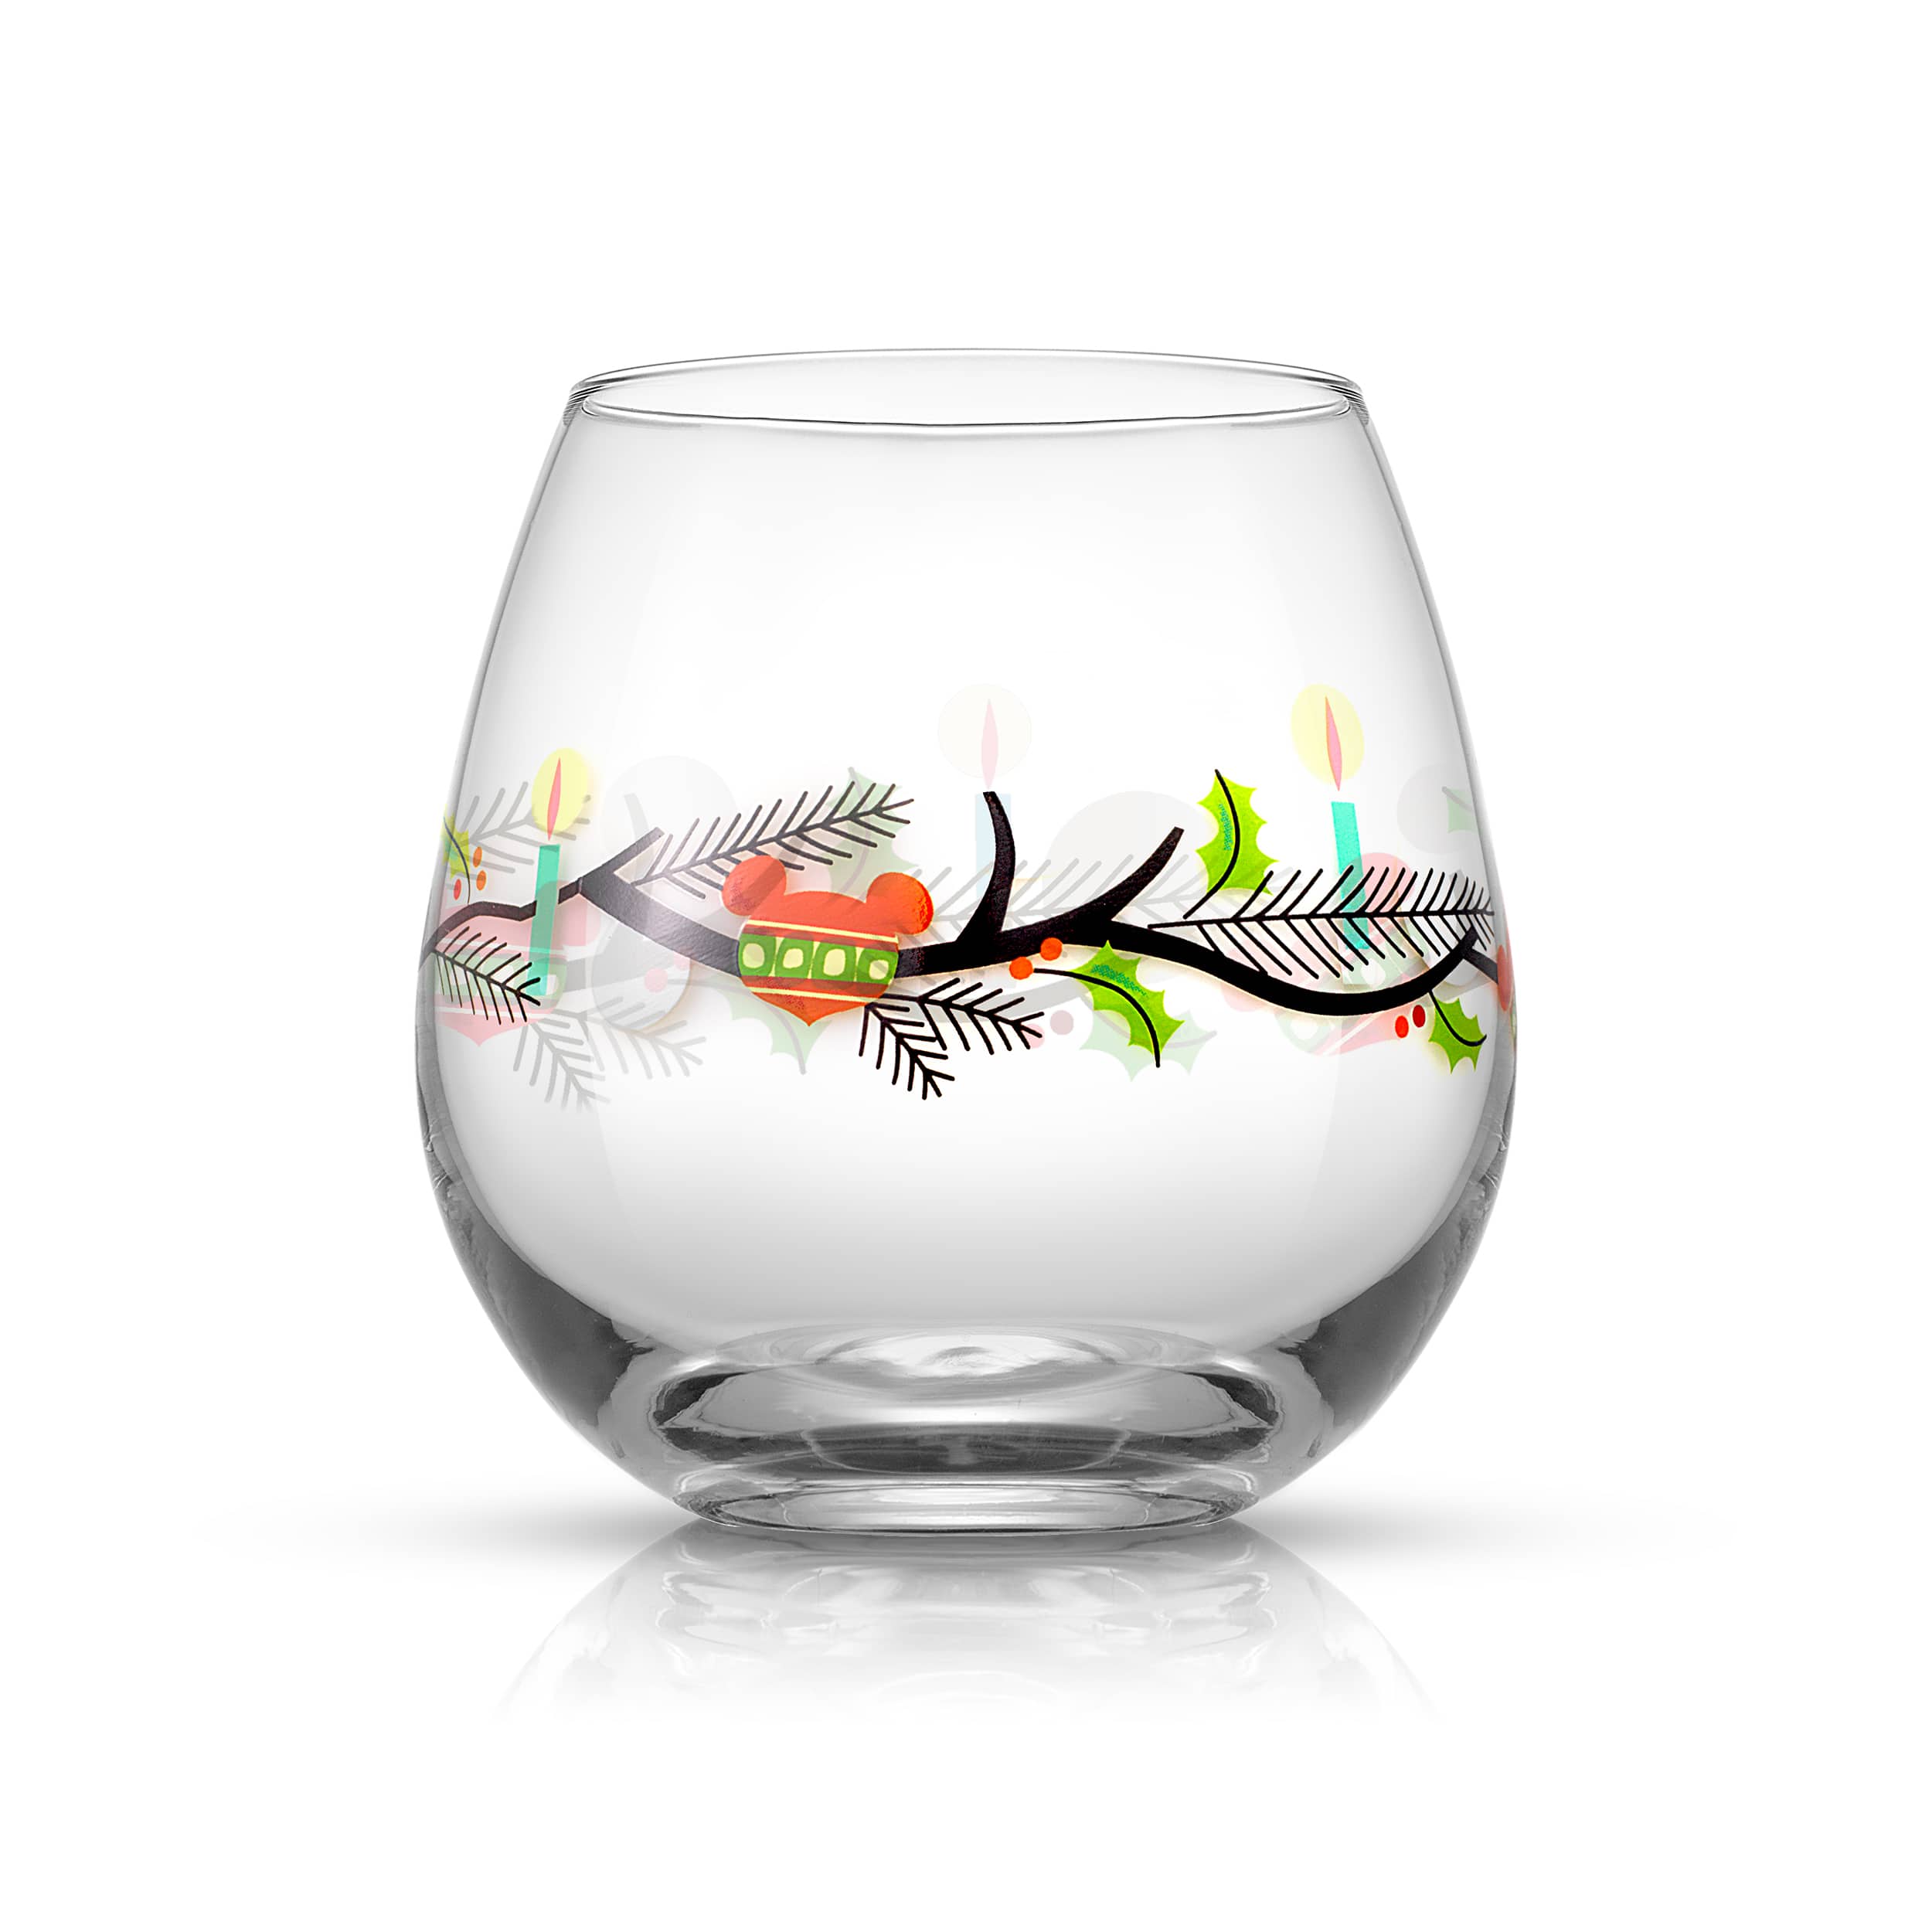 JoyJolt® Cosmo Double Walled Stemless Wine Glasses, 4ct.